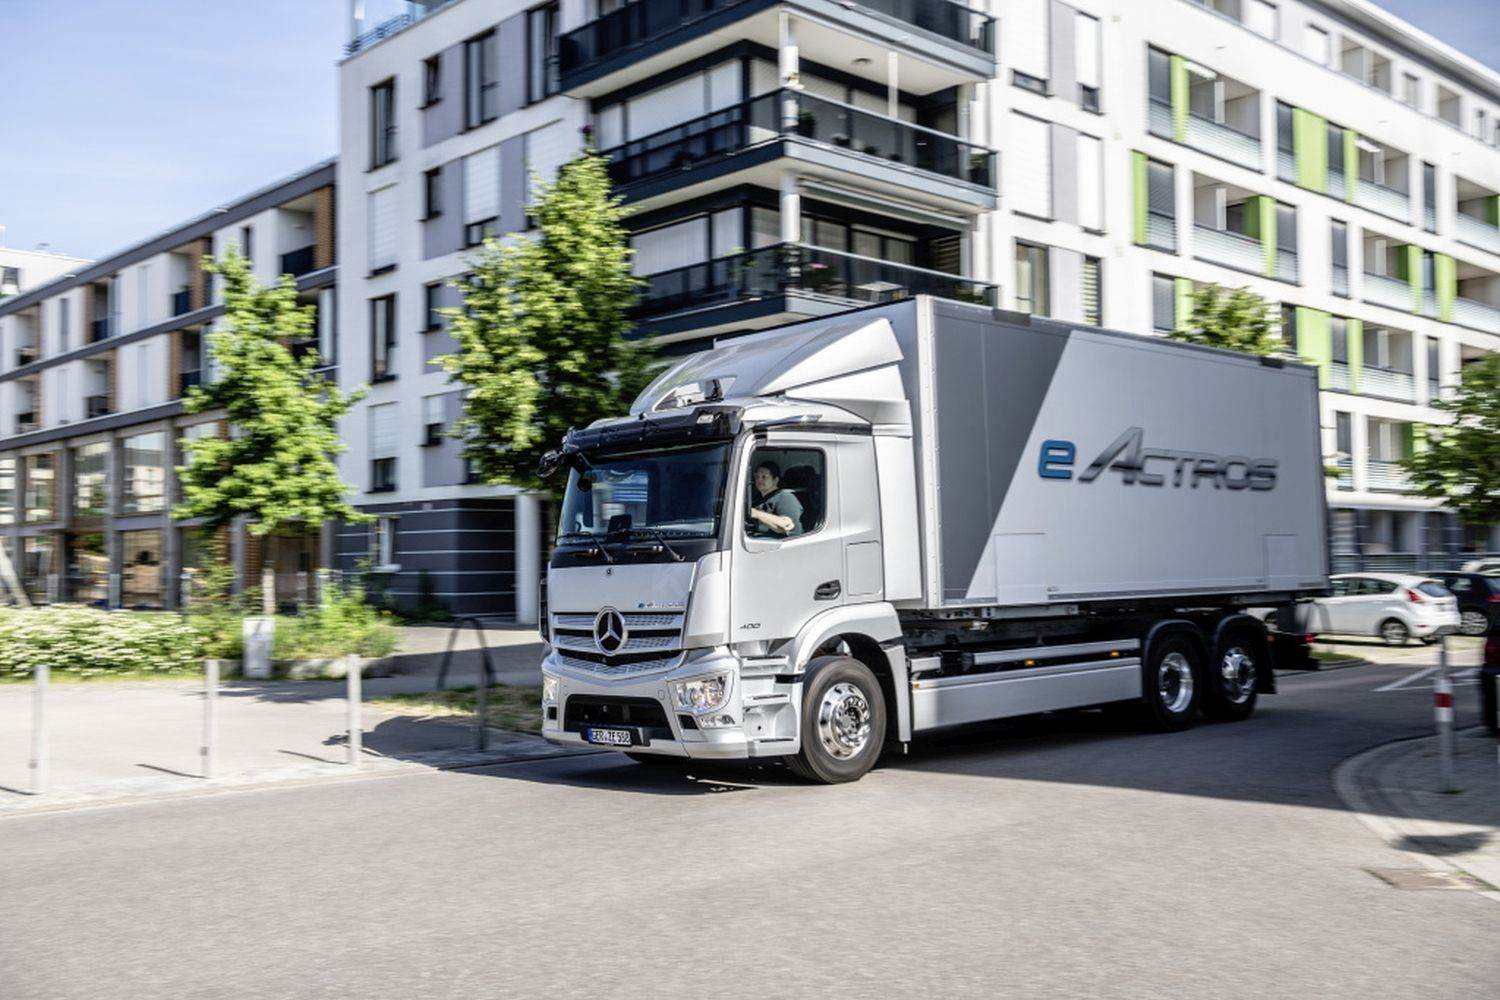  World premiere of the new eActros;Daimler Trucks;A new truck for a new era: Mercedes-Benz eActros celebrates its ;Daimler Global MediaSite;06 - 2021;World Premiere of the Mercedes-Benz eActros 2021;eActros;Trucks;Mercedes-Benz;MediaSite;Brands & Products;Events;Press Kits sorted by years;Press Releases sorted by years;2021 